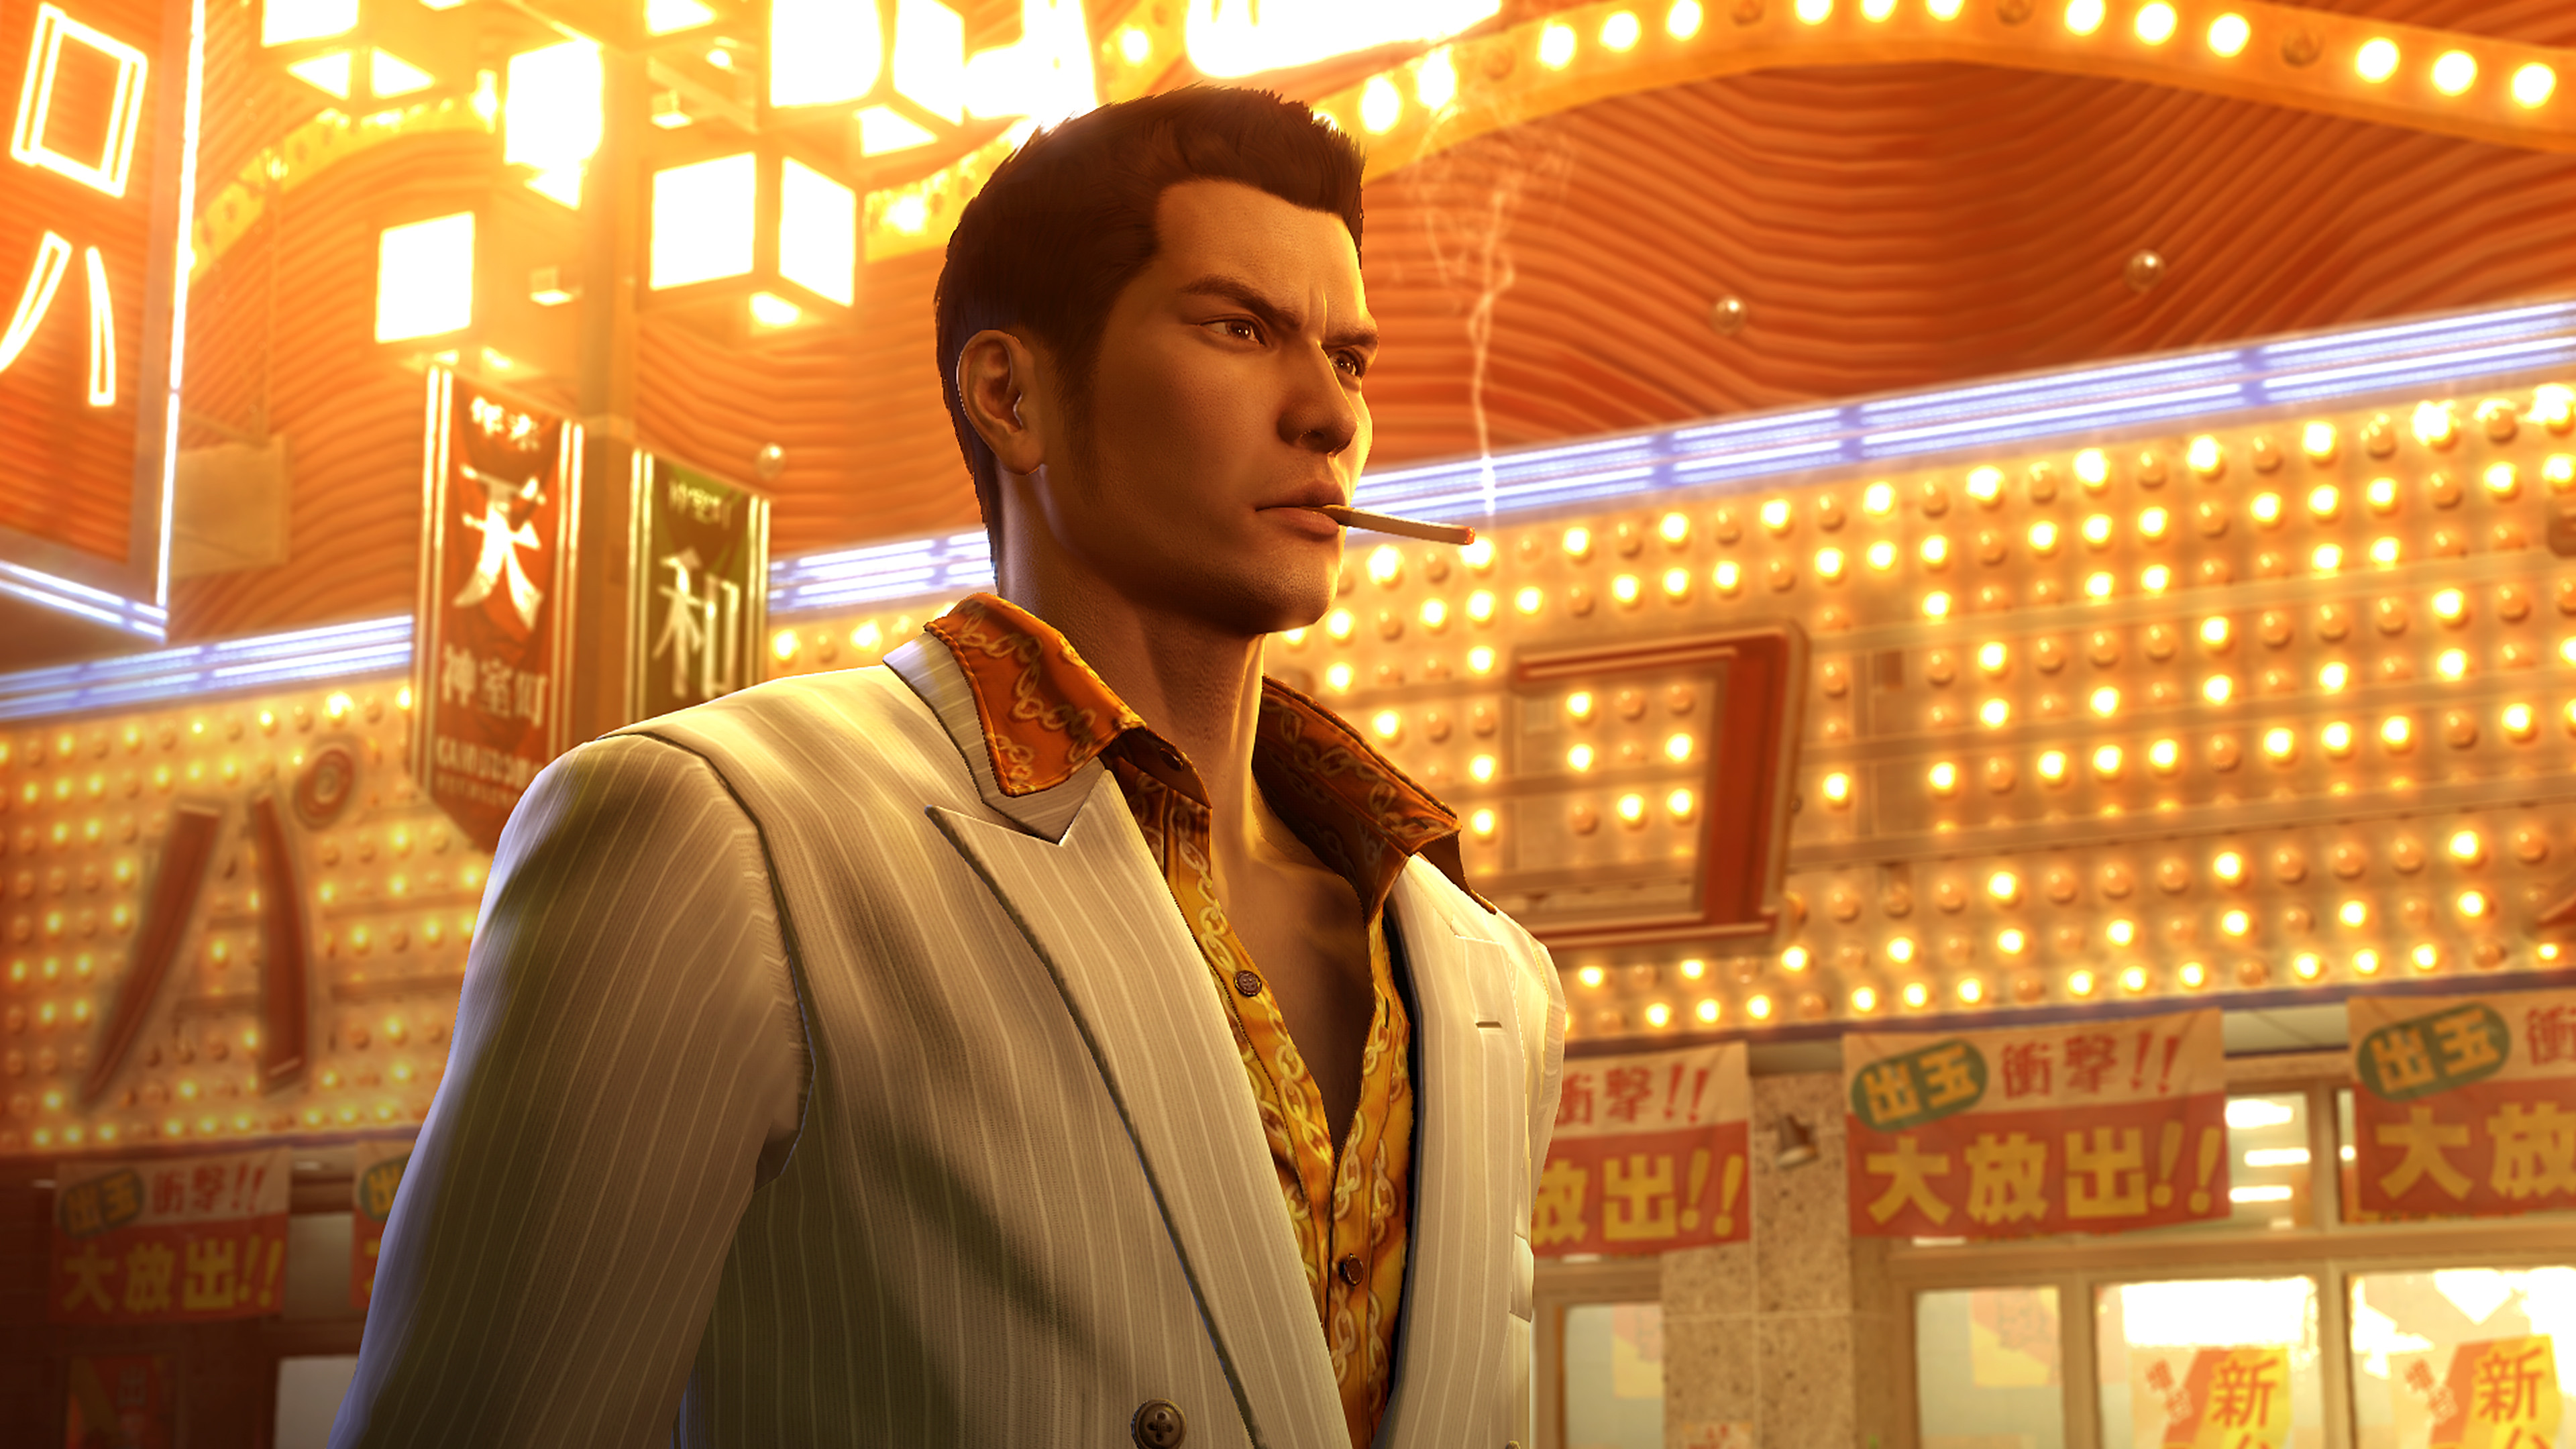 PS Extra Members: PS4/PS5 Digital: Yakuza 0, Dead by Daylight, Bugsnax and more